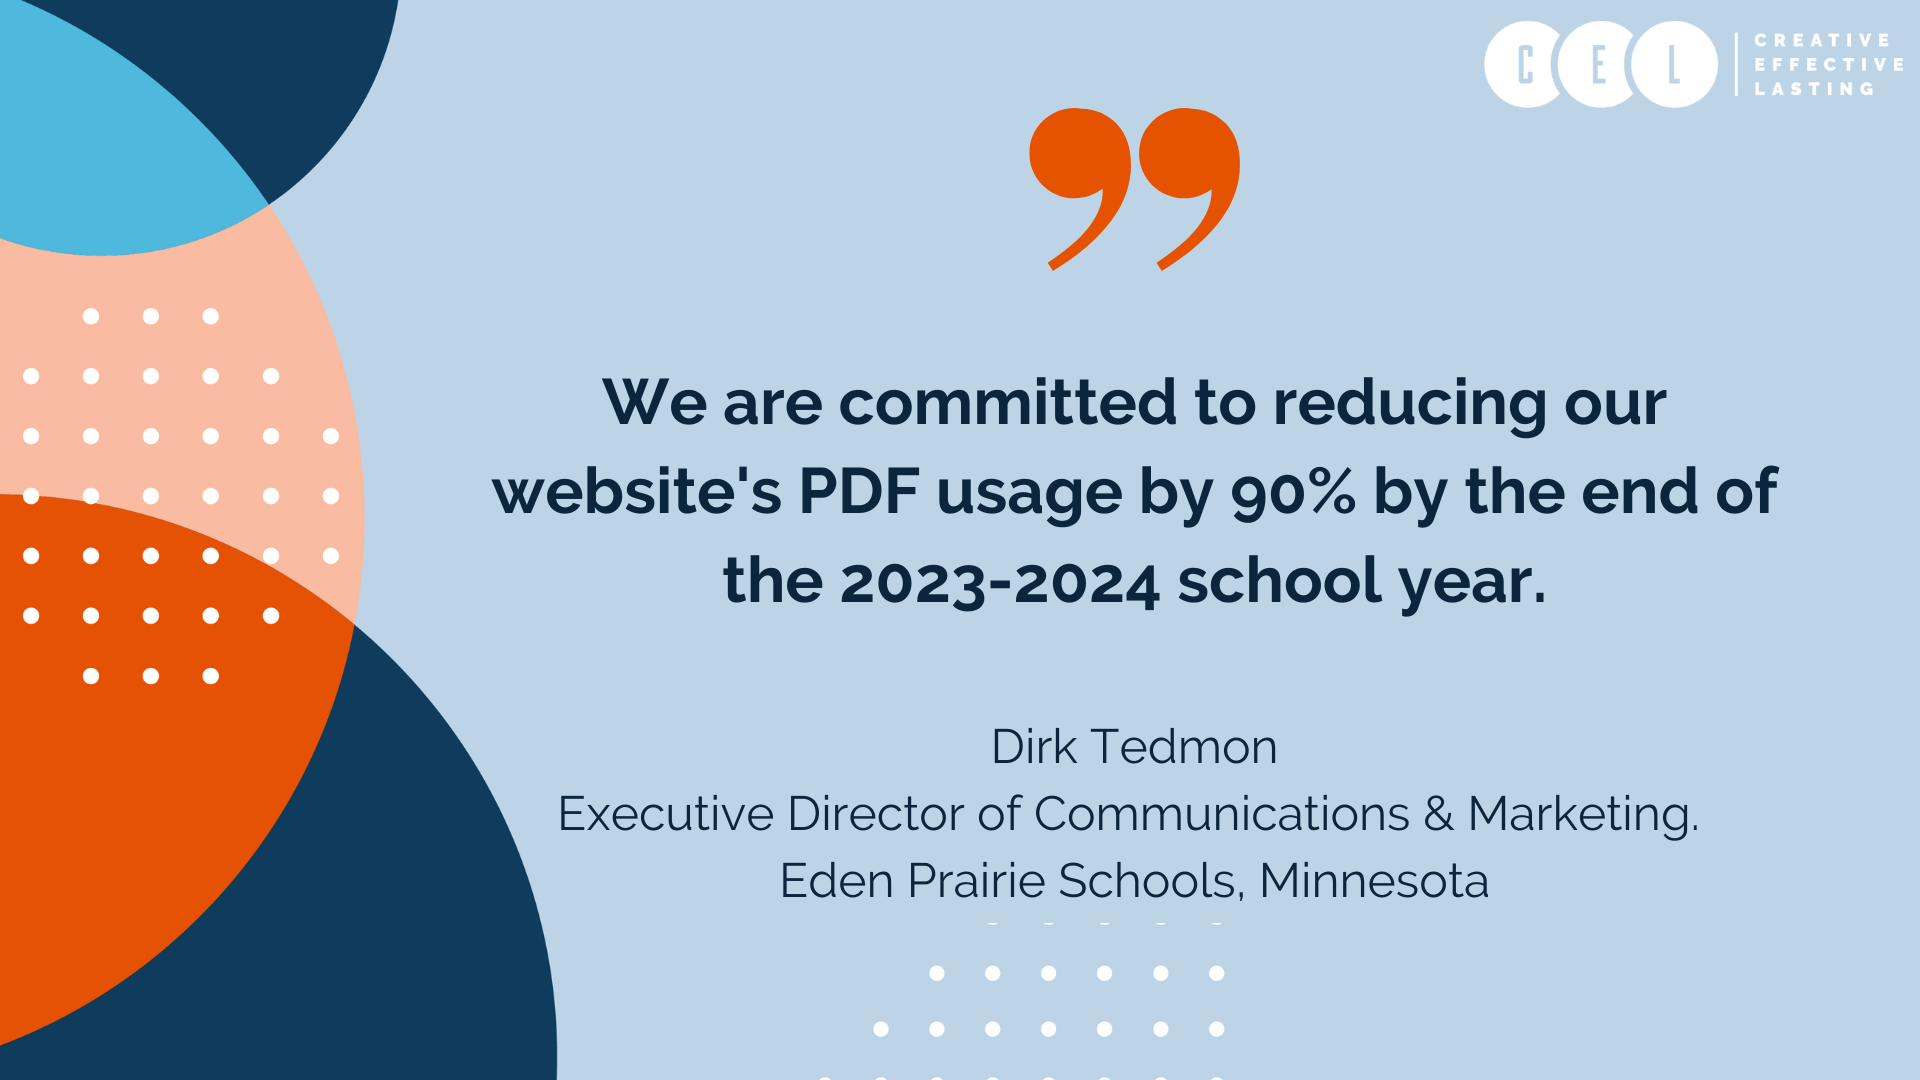 We are committed to reducing our website's PDF useage by 90% by the end of the 2023-2024 school year. Dirk Tedmon, Executive Director of Communications, Eden Prairie Schools